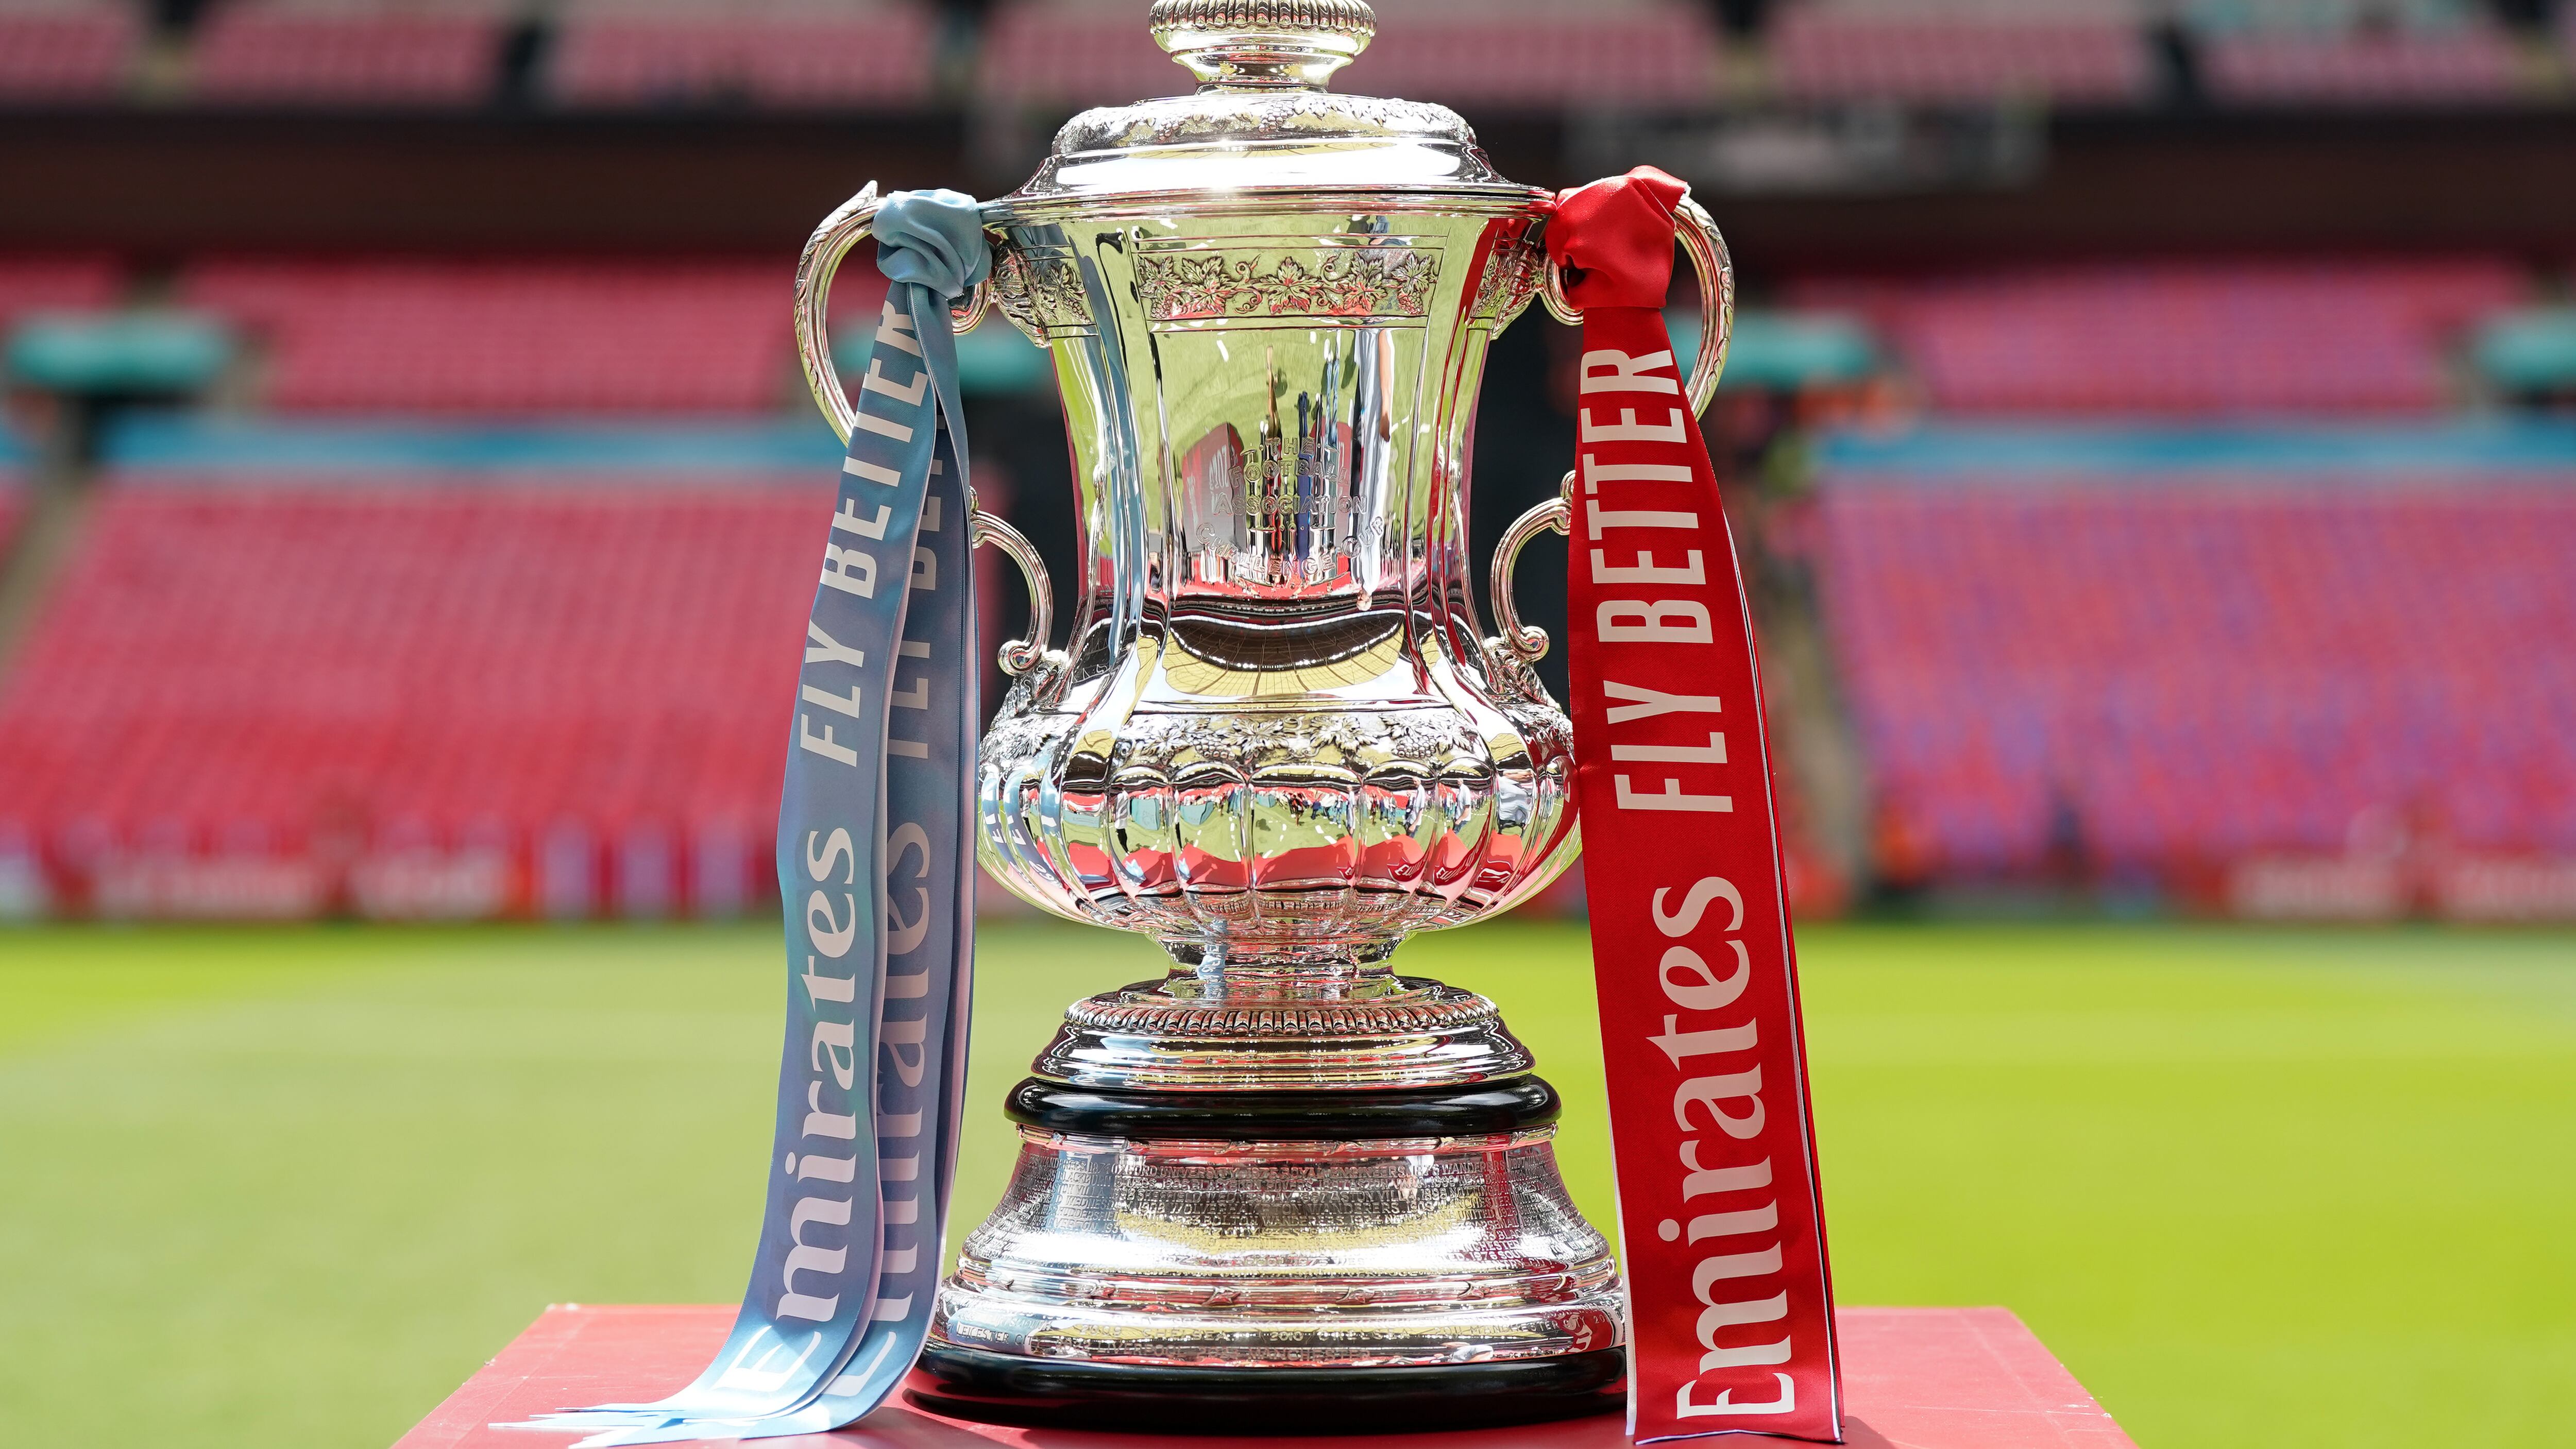 Twenty-seven clubs have written to the Culture Secretary calling for the reinstatement of FA Cup replays